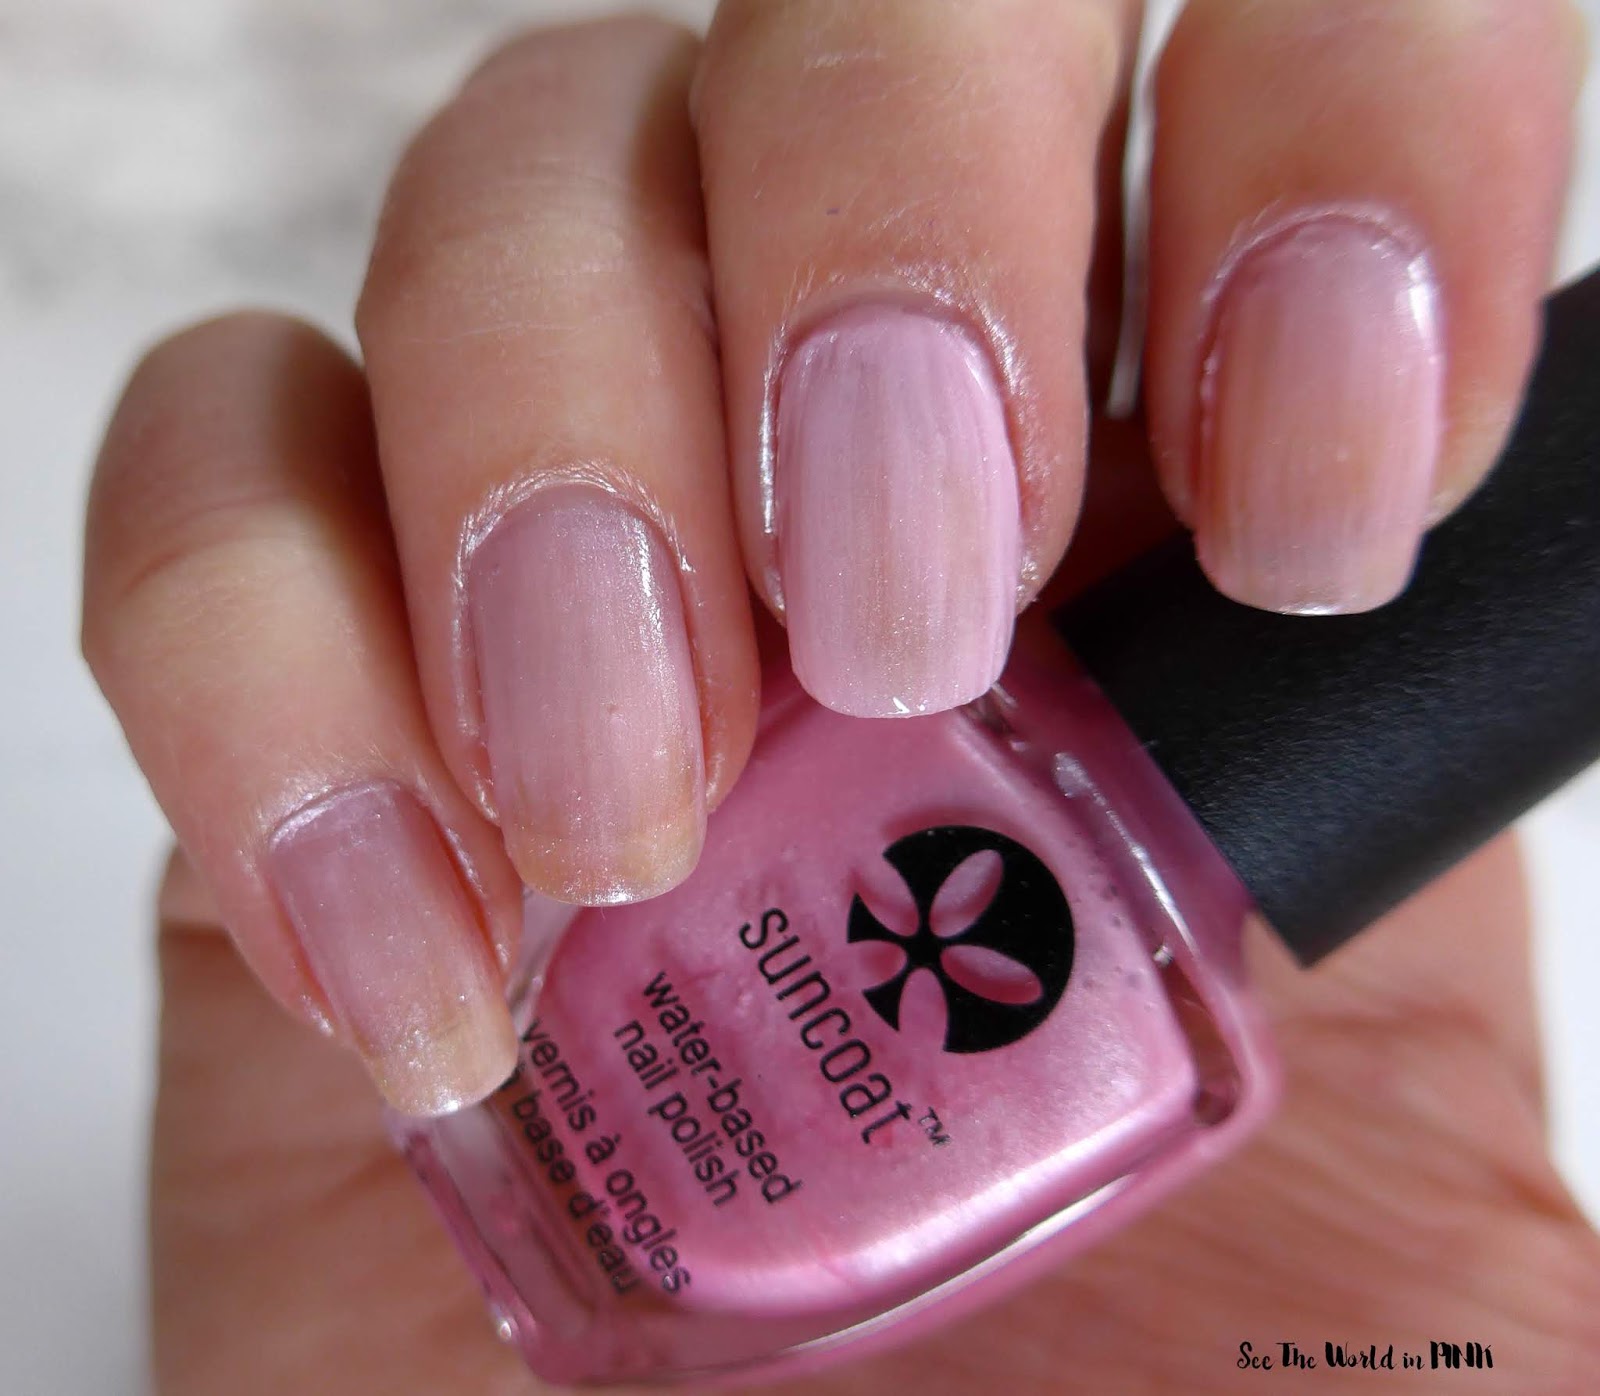 Manicure Monday - Suncoat Water Based Nail Polishes Swatches and Review